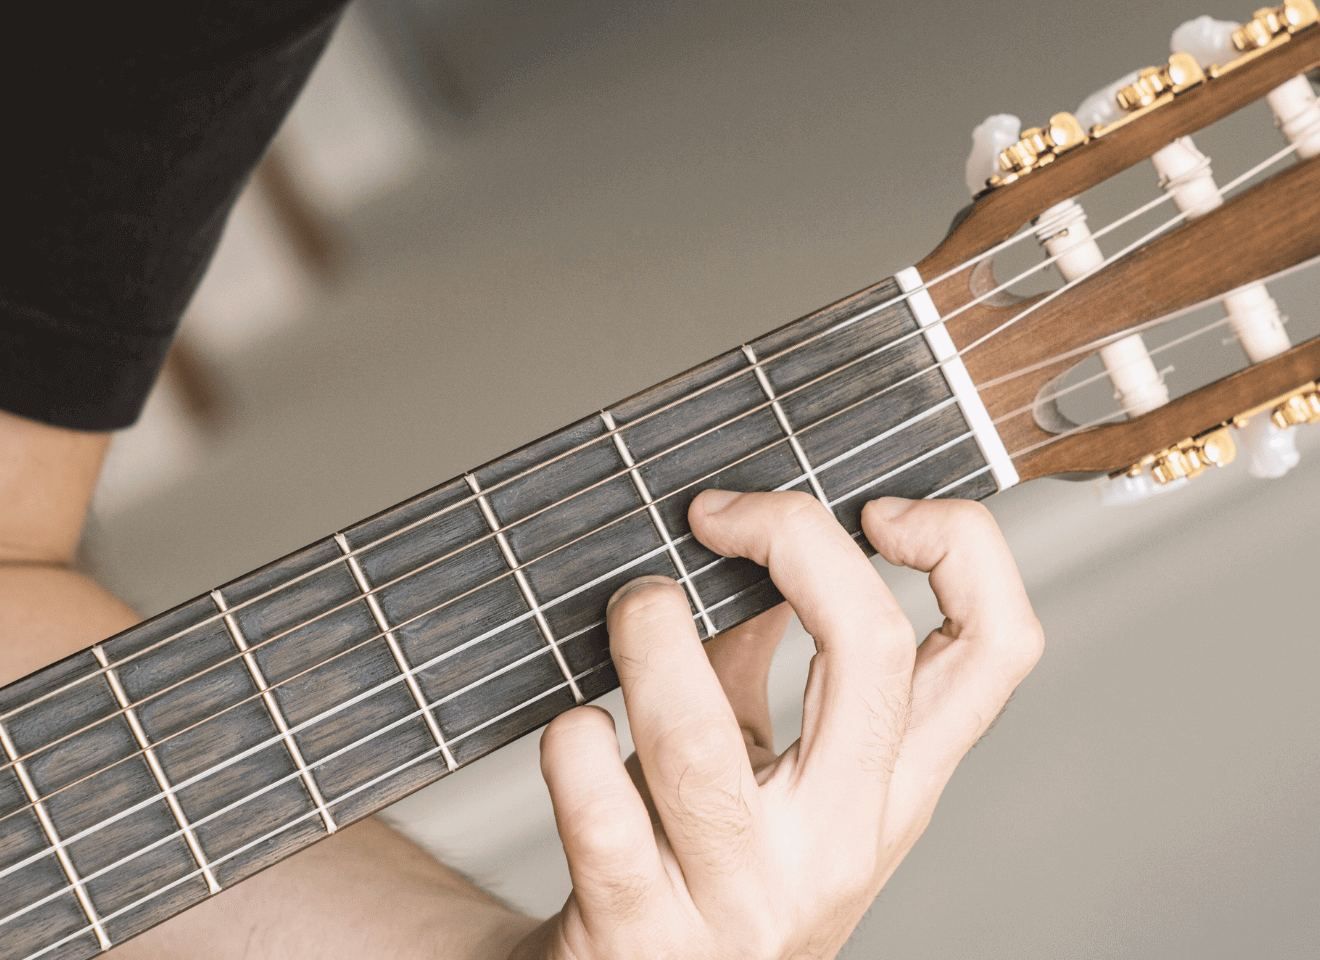 110 Guitar Songs Without Barre Chords For Beginners (+TABS)